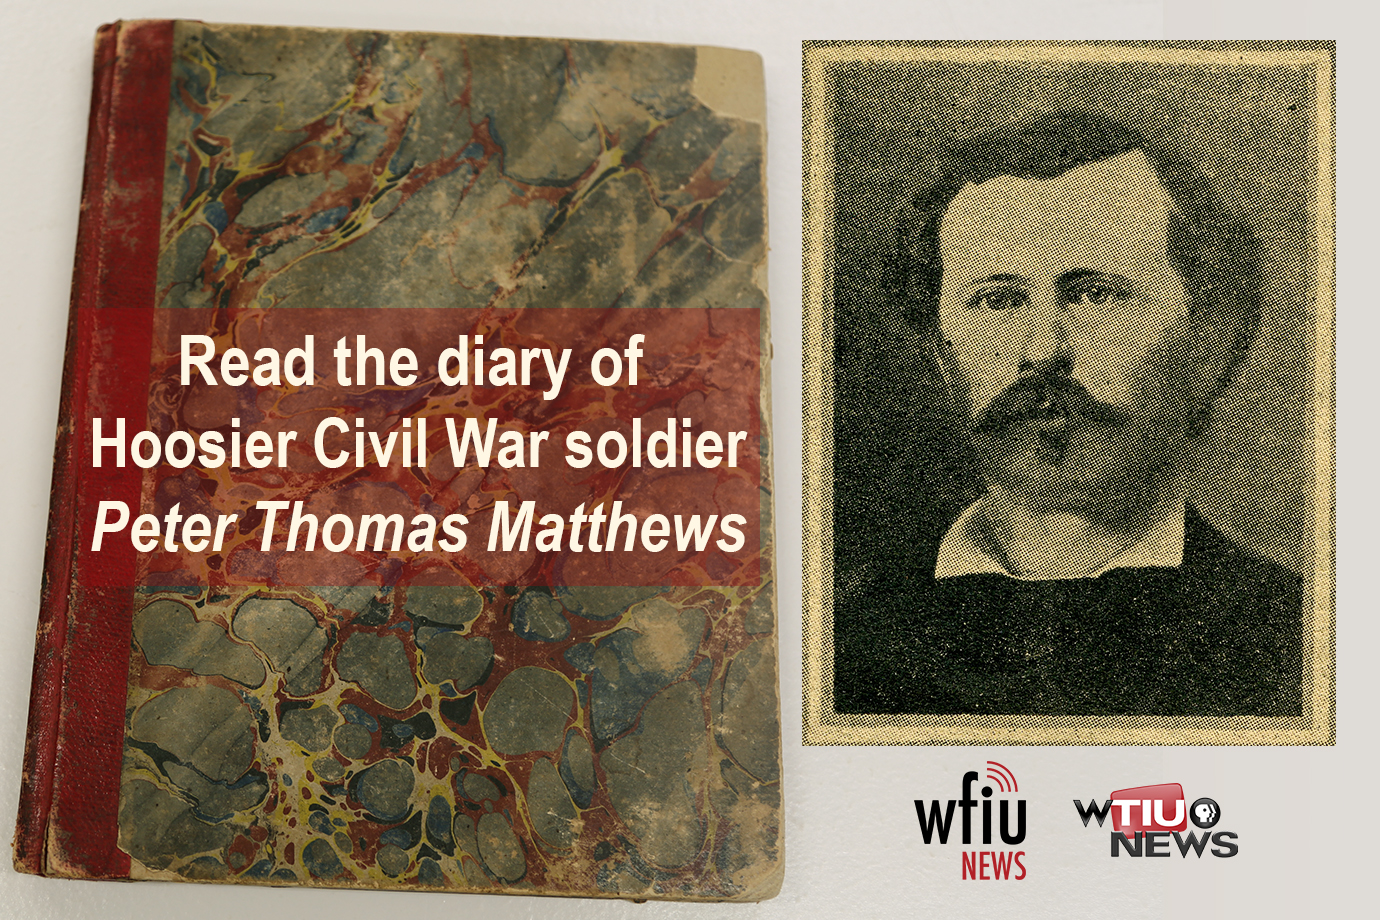 A photo of peter matthews and the text read the diary of Hoosier civil War soldier peter thomas matthews